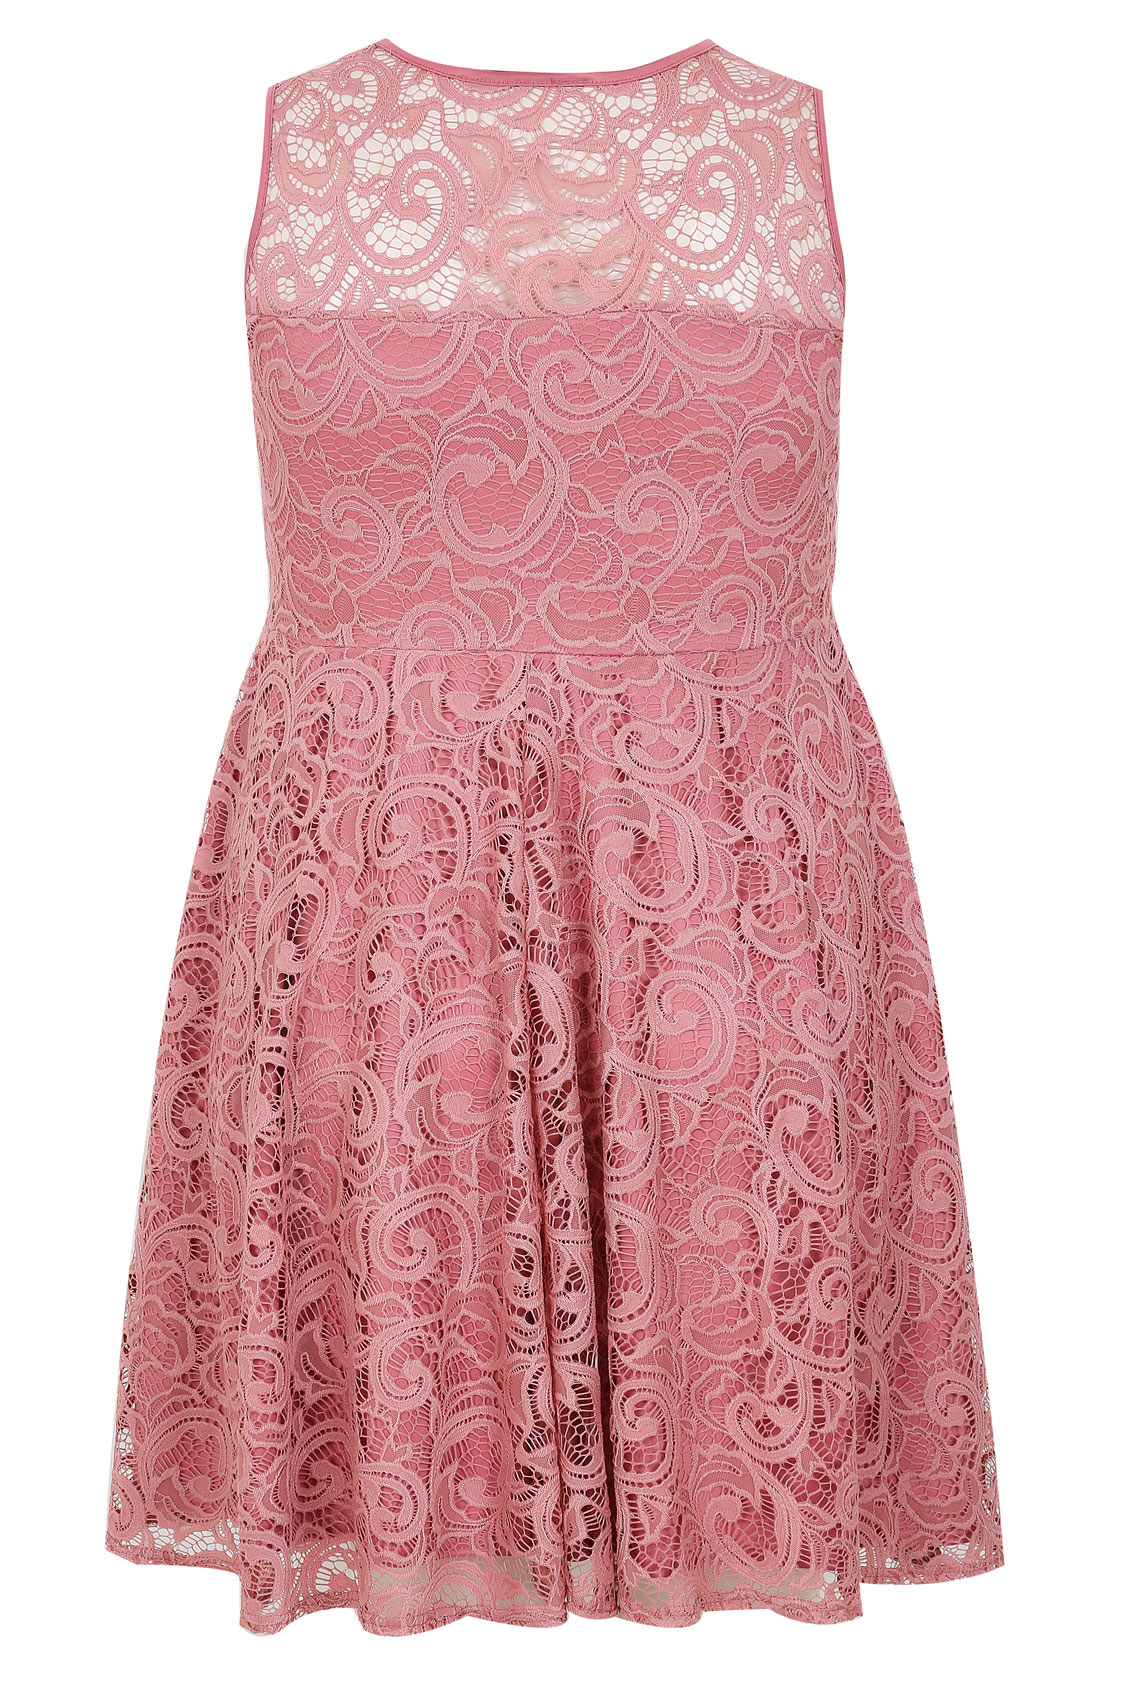 Rose Pink Lace Skater Dress With Sweetheart Neckline plus size 16 to 32